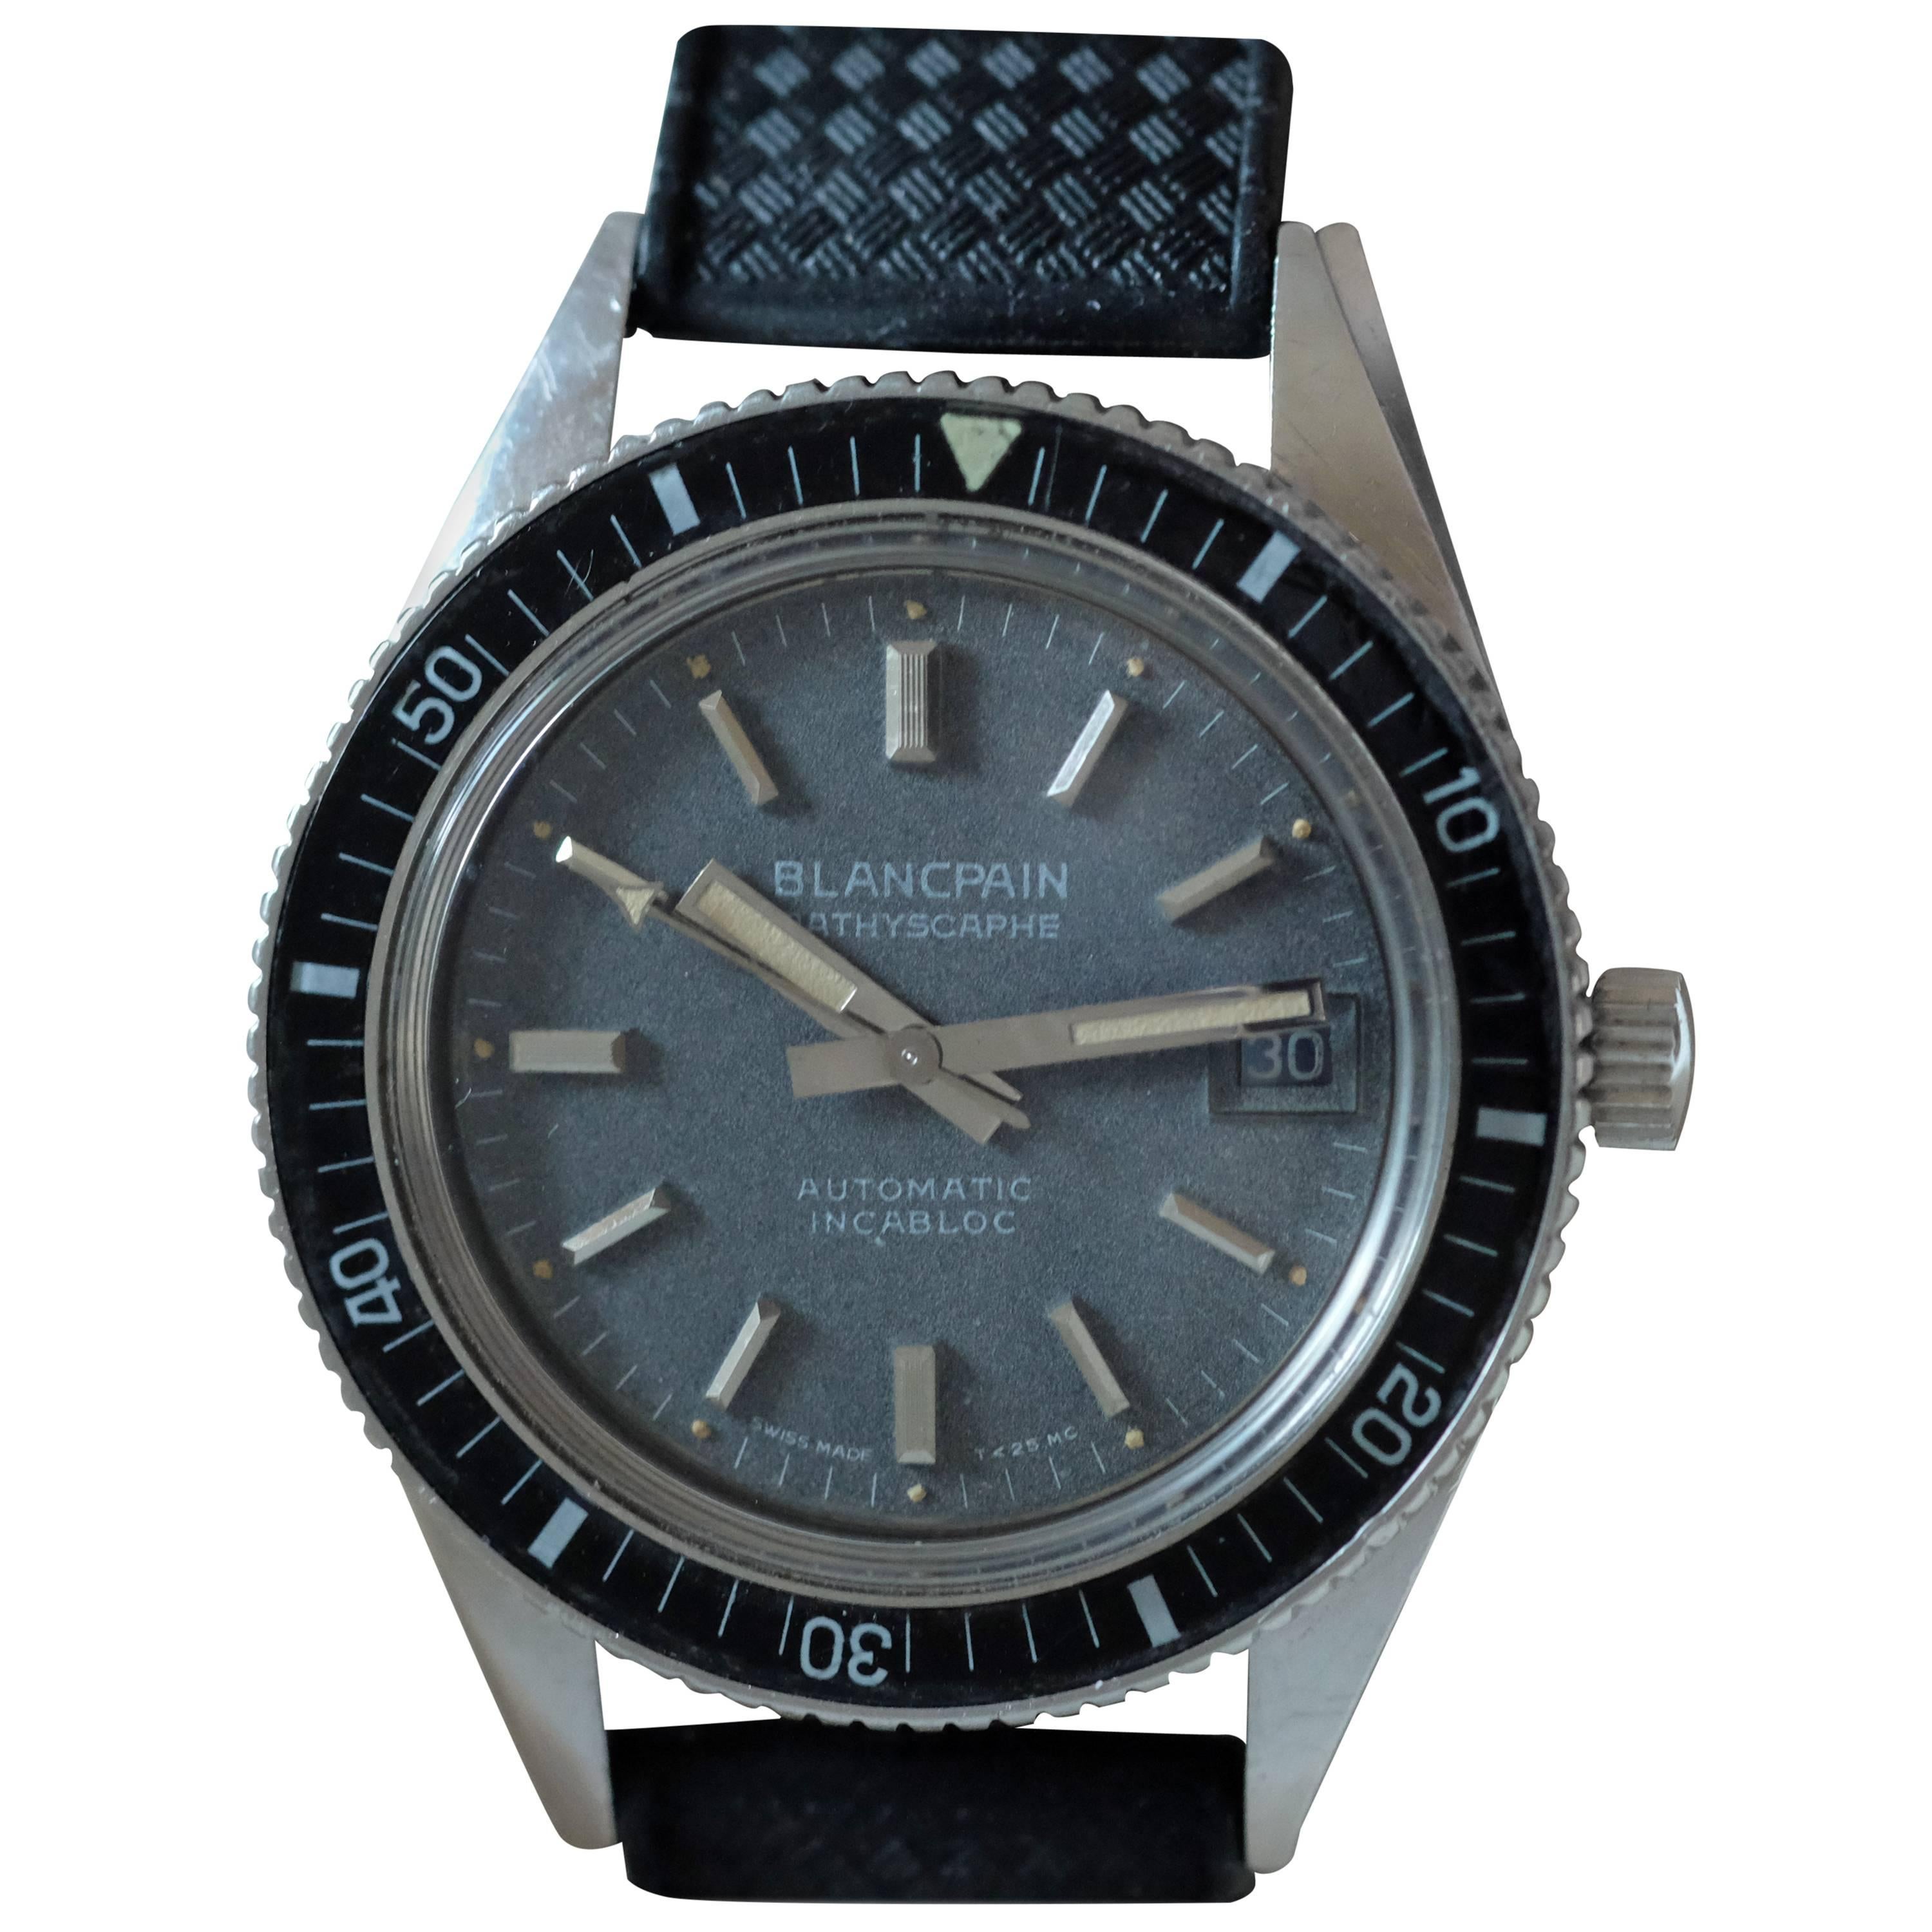 Blancpain Stainless Steel Bathyscaphe Diver's Automatic Wristwatch